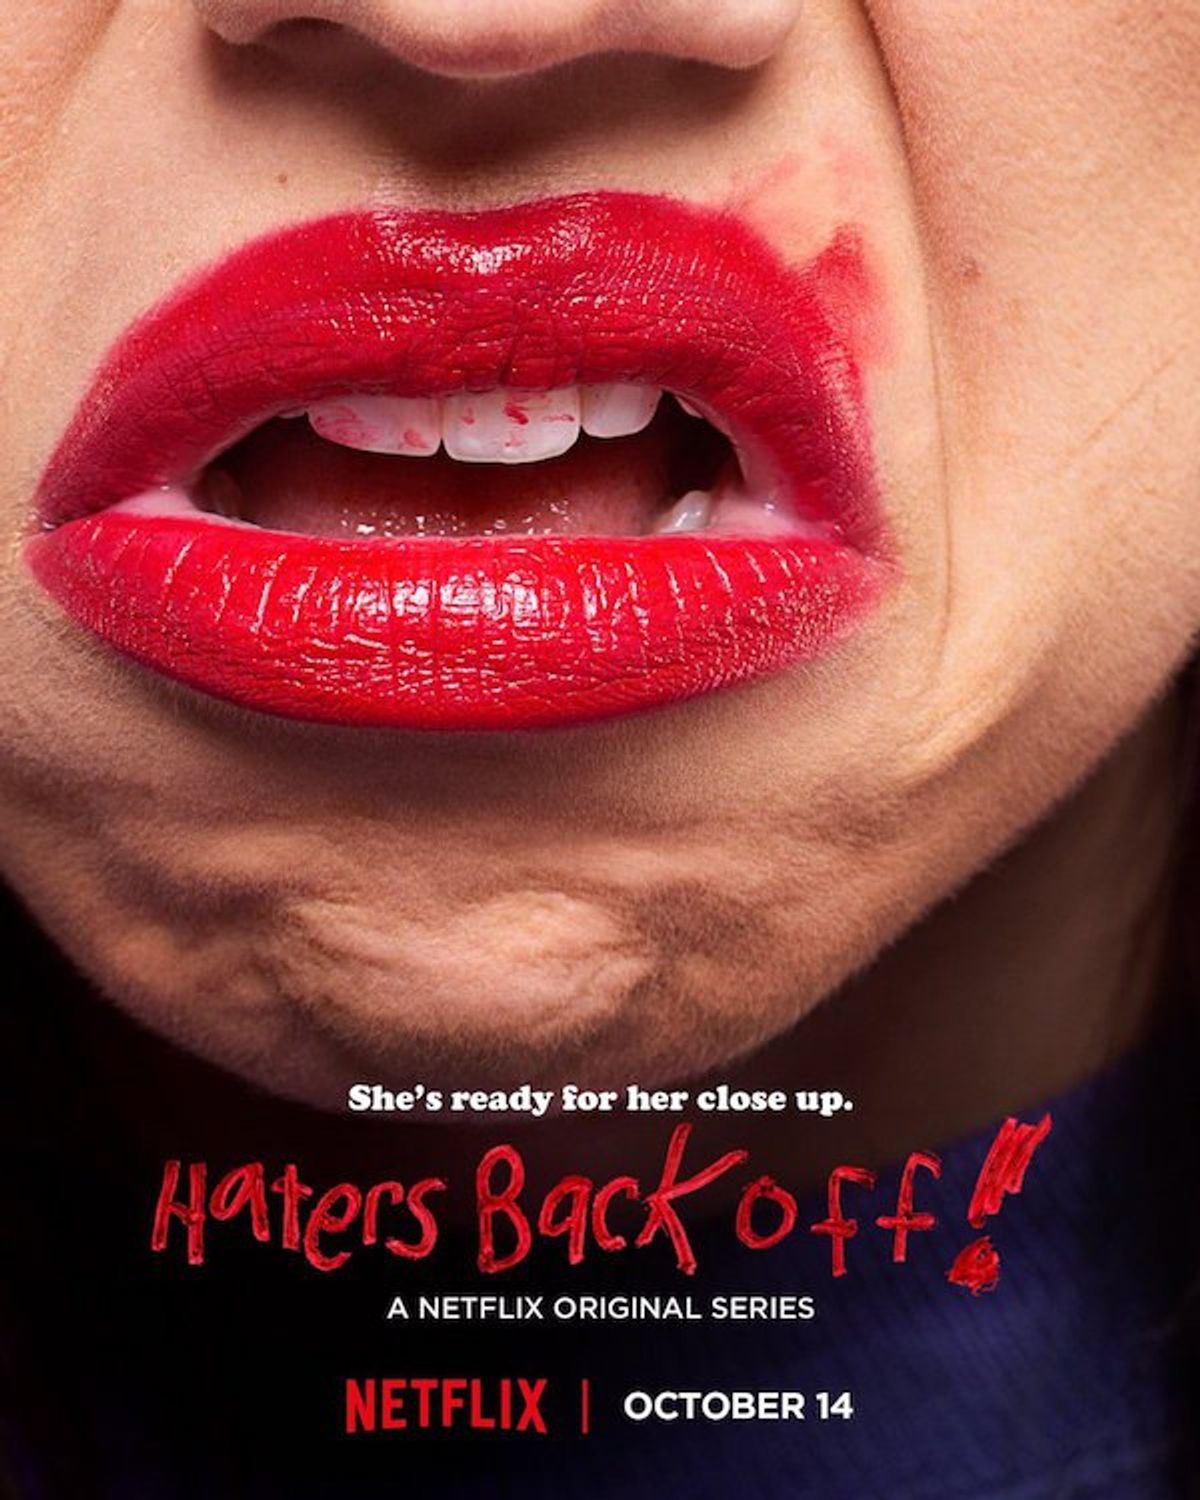 15 Reasons I'm Excited For "Haters Back Off"